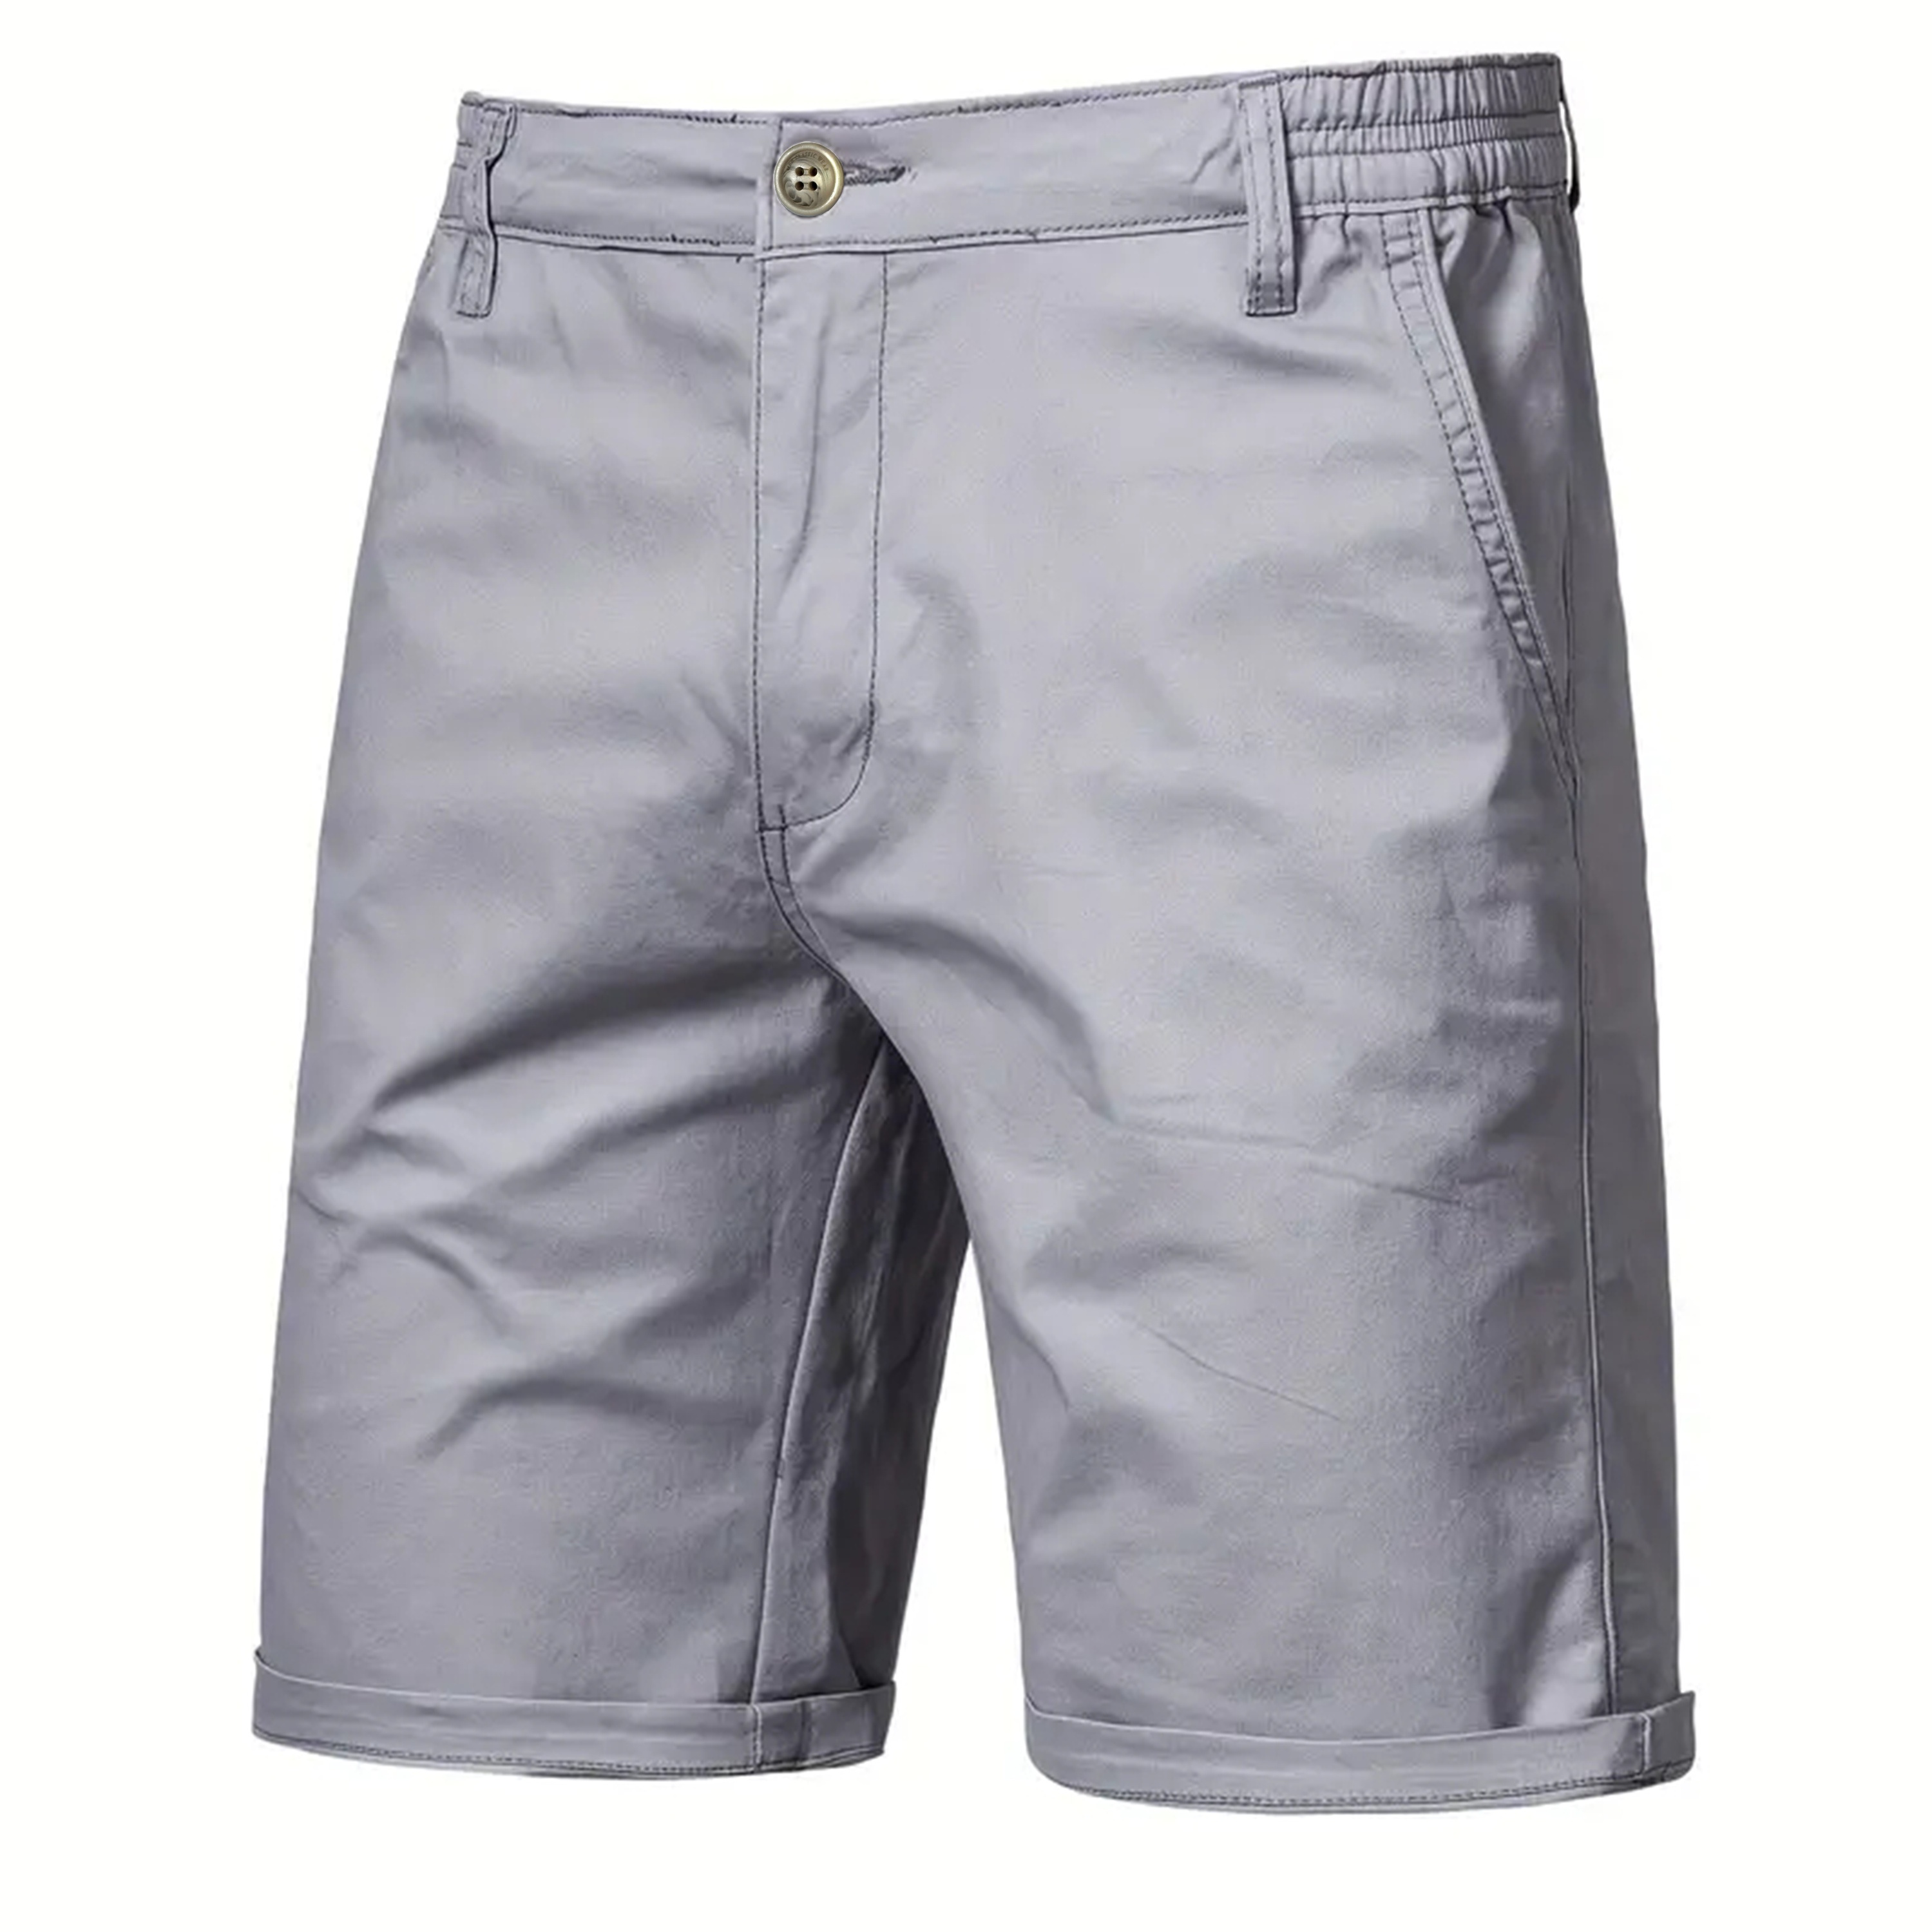 

Solid Color Classic Shorts With Elastic Waistband And Multiple Pockets, Casual And Chic Shorts For Men's Summer Outdoors Wear